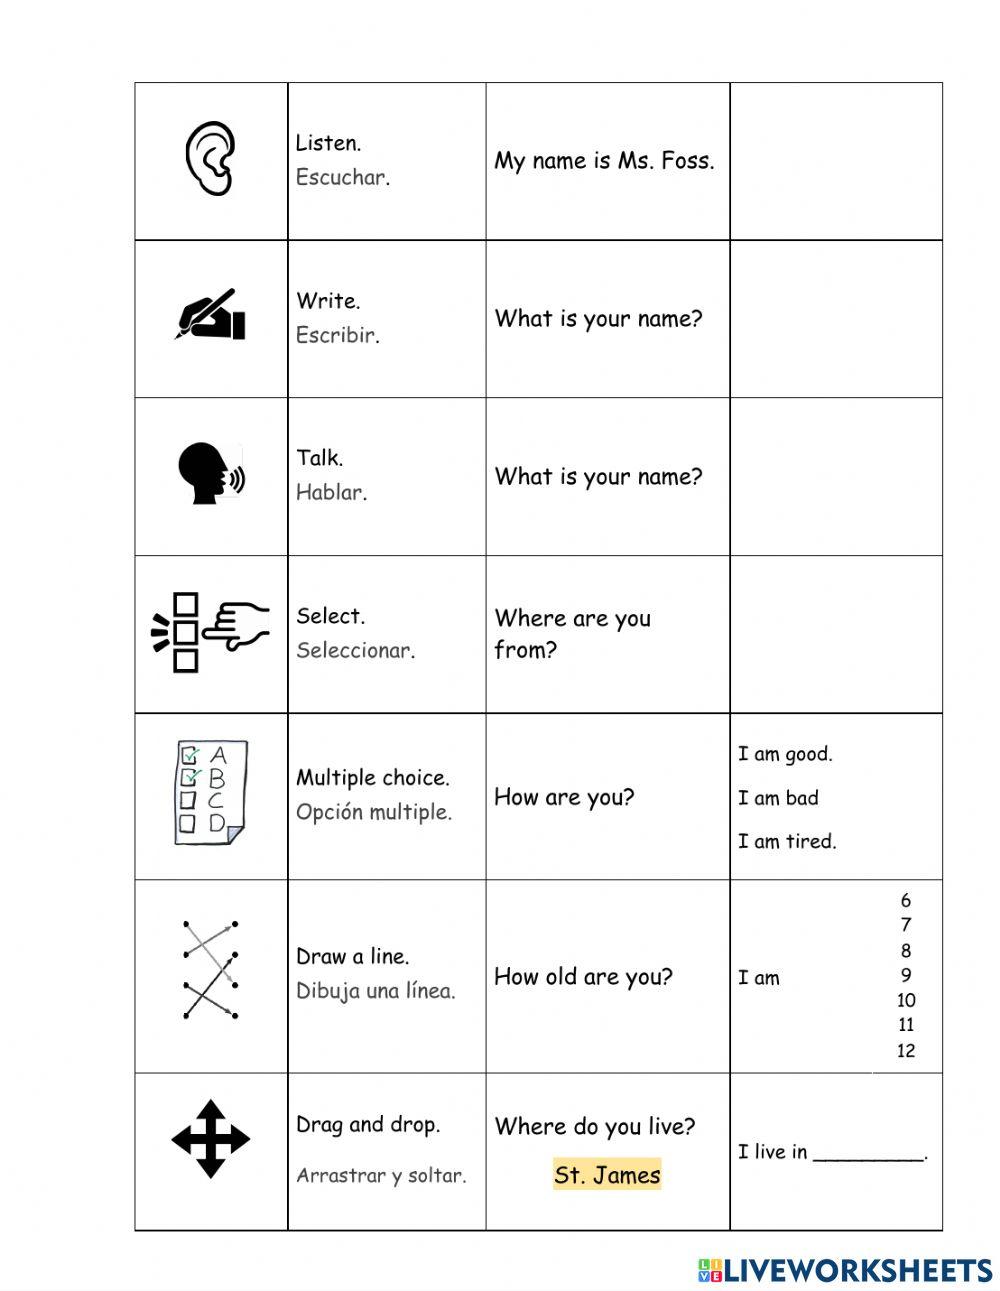 Liveworksheets Practices: Basic Questions in English